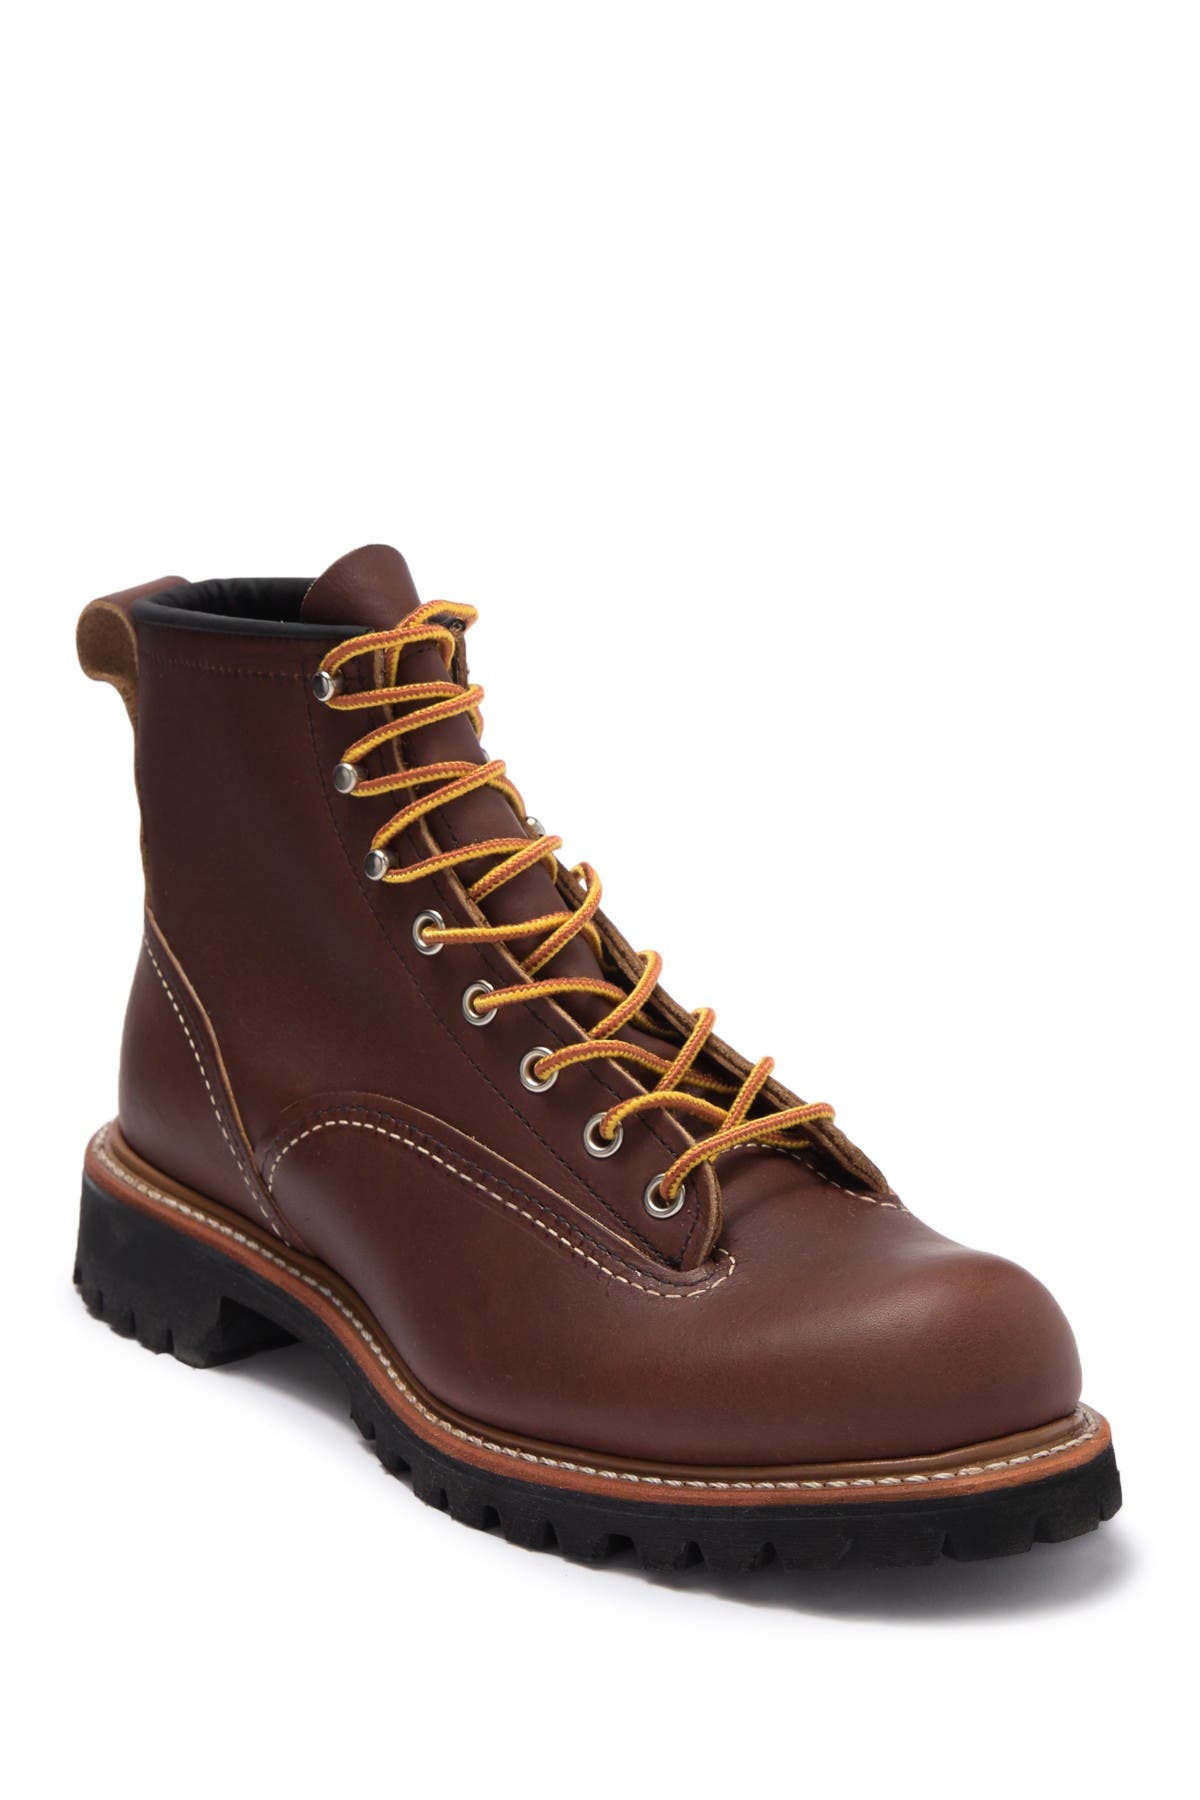 lineman boots red wing